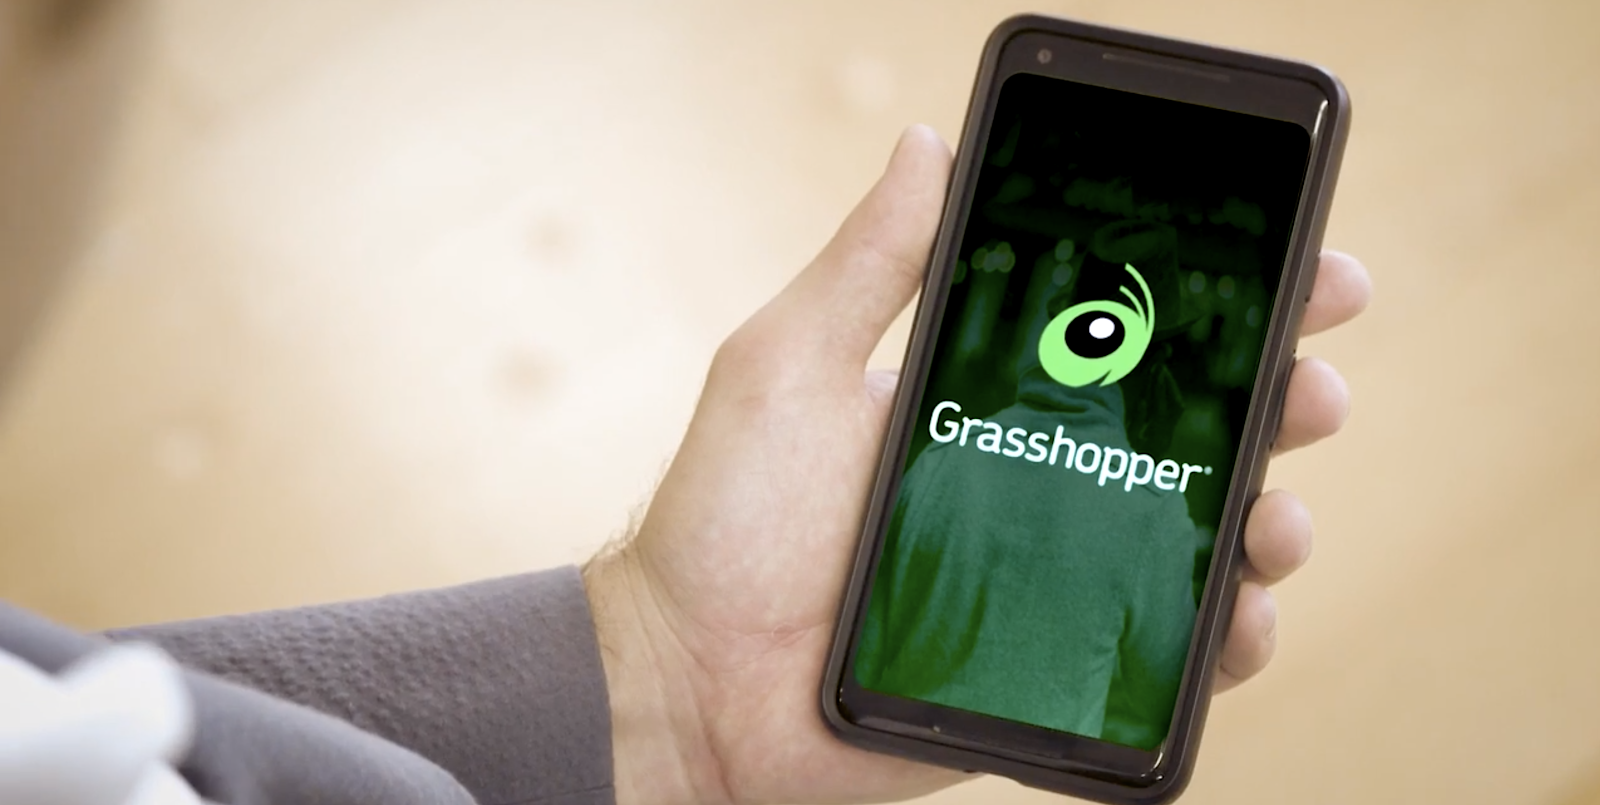 Example of Grasshopper 800 number on phone